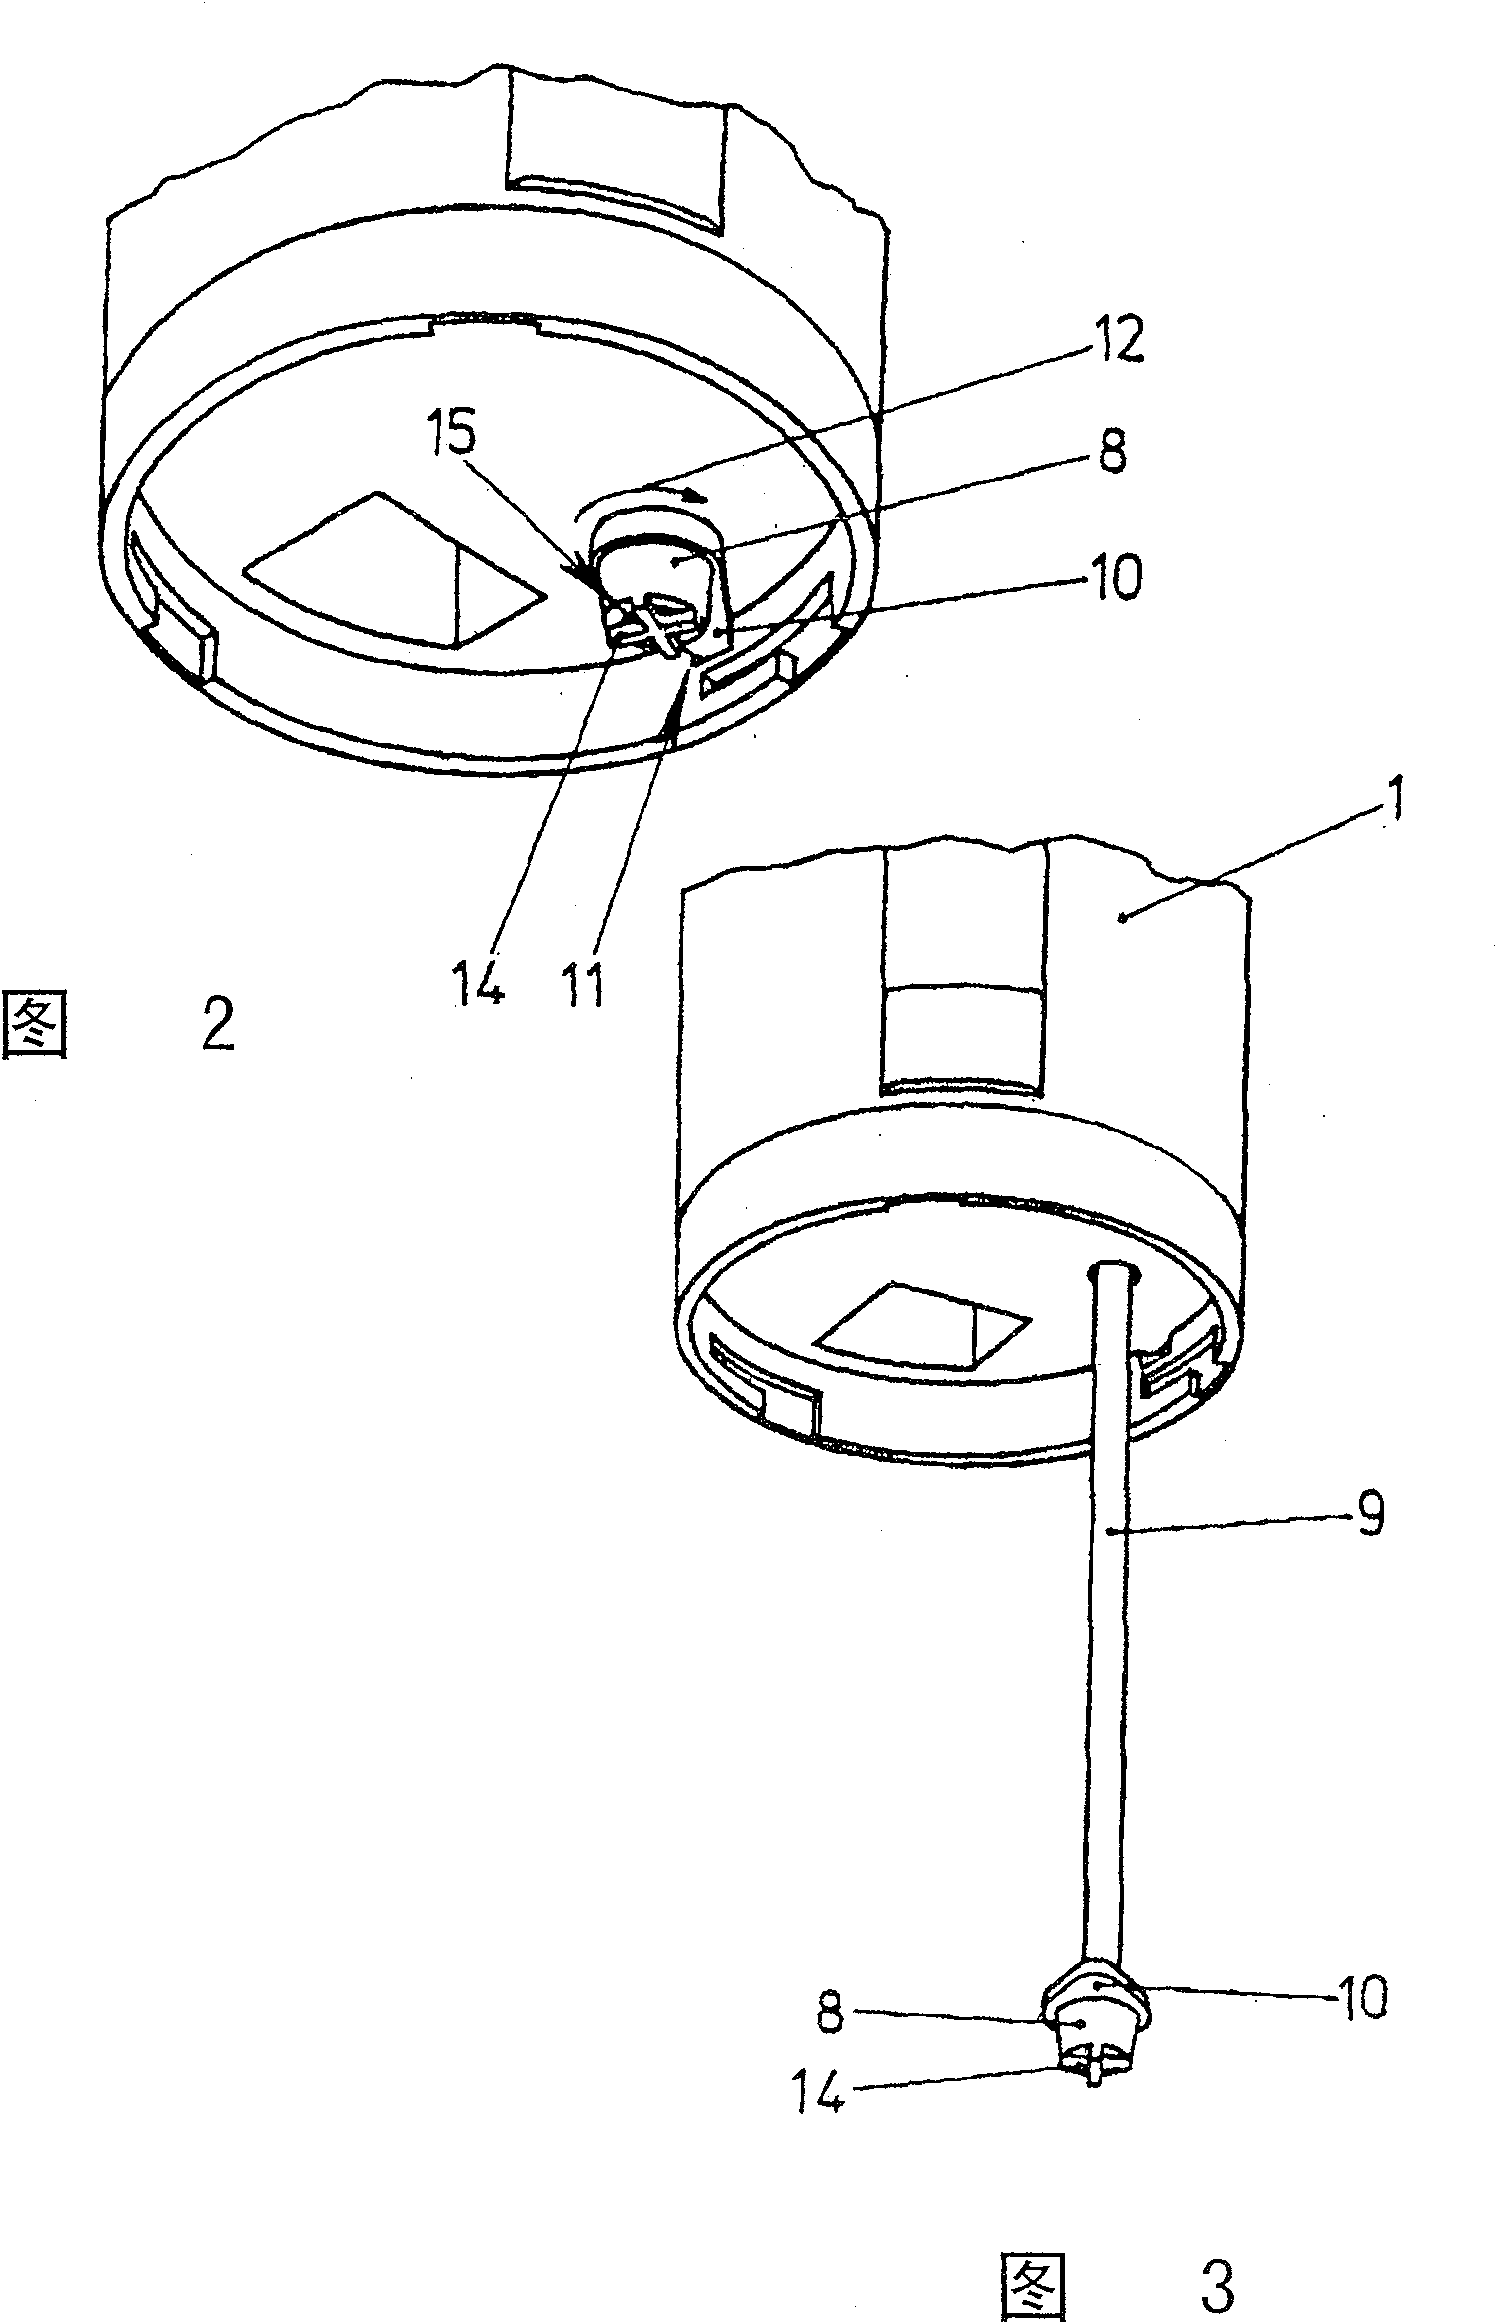 Teeth spray-rinsing device having two detachably connectable housings